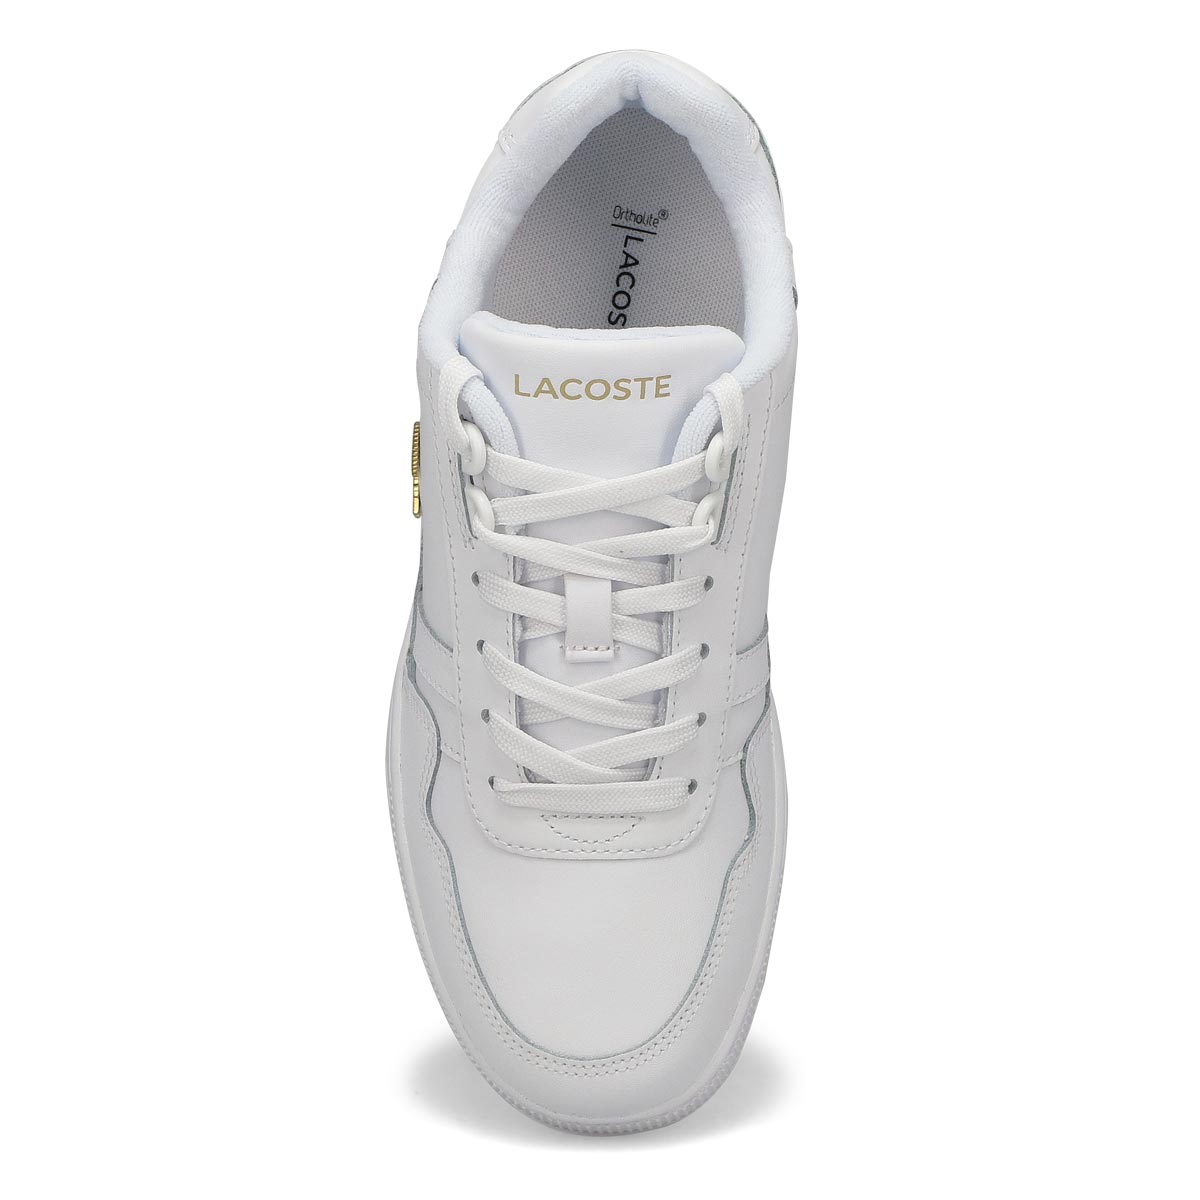 Womens T-Clip Lace Up Fashion Sneaker - White/Gold